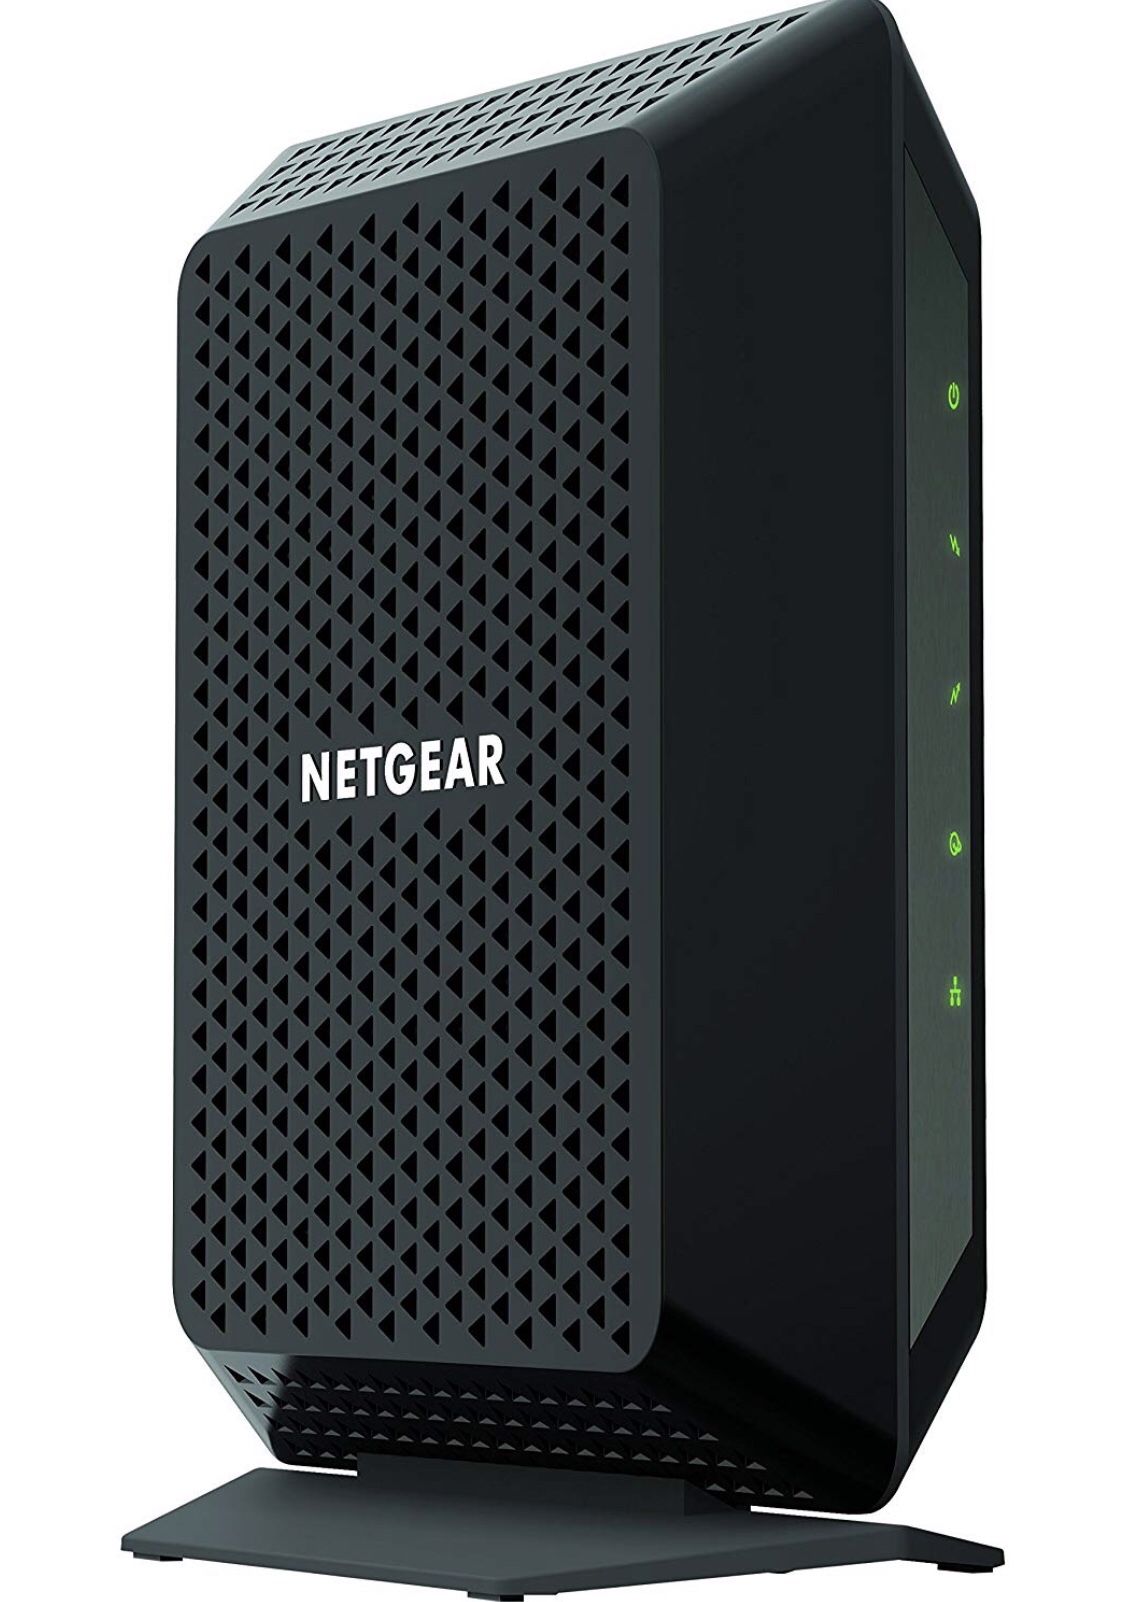 NETGEAR Cable Modem CM700 - Compatible with all Cable Providers including Xfinity by Comcast, Spectrum, Cox | For Cable Plans Up to 500 Mbps | DOCSIS